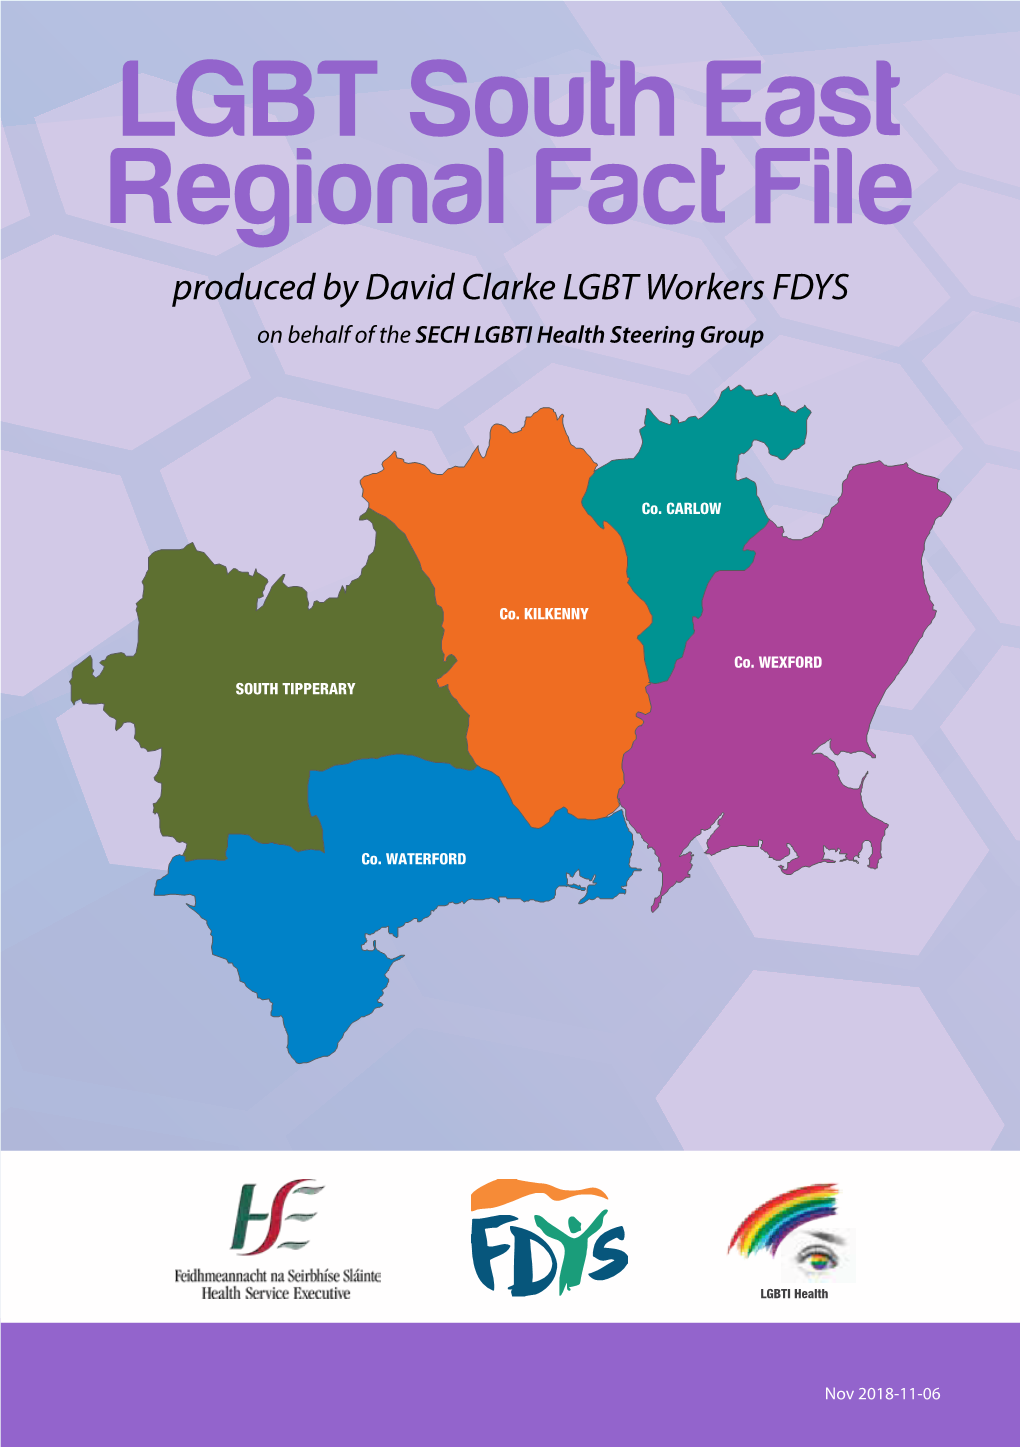 LGBT South East Regional Fact File Produced by David Clarke LGBT Workers FDYS on Behalf of the SECH LGBTI Health Steering Group